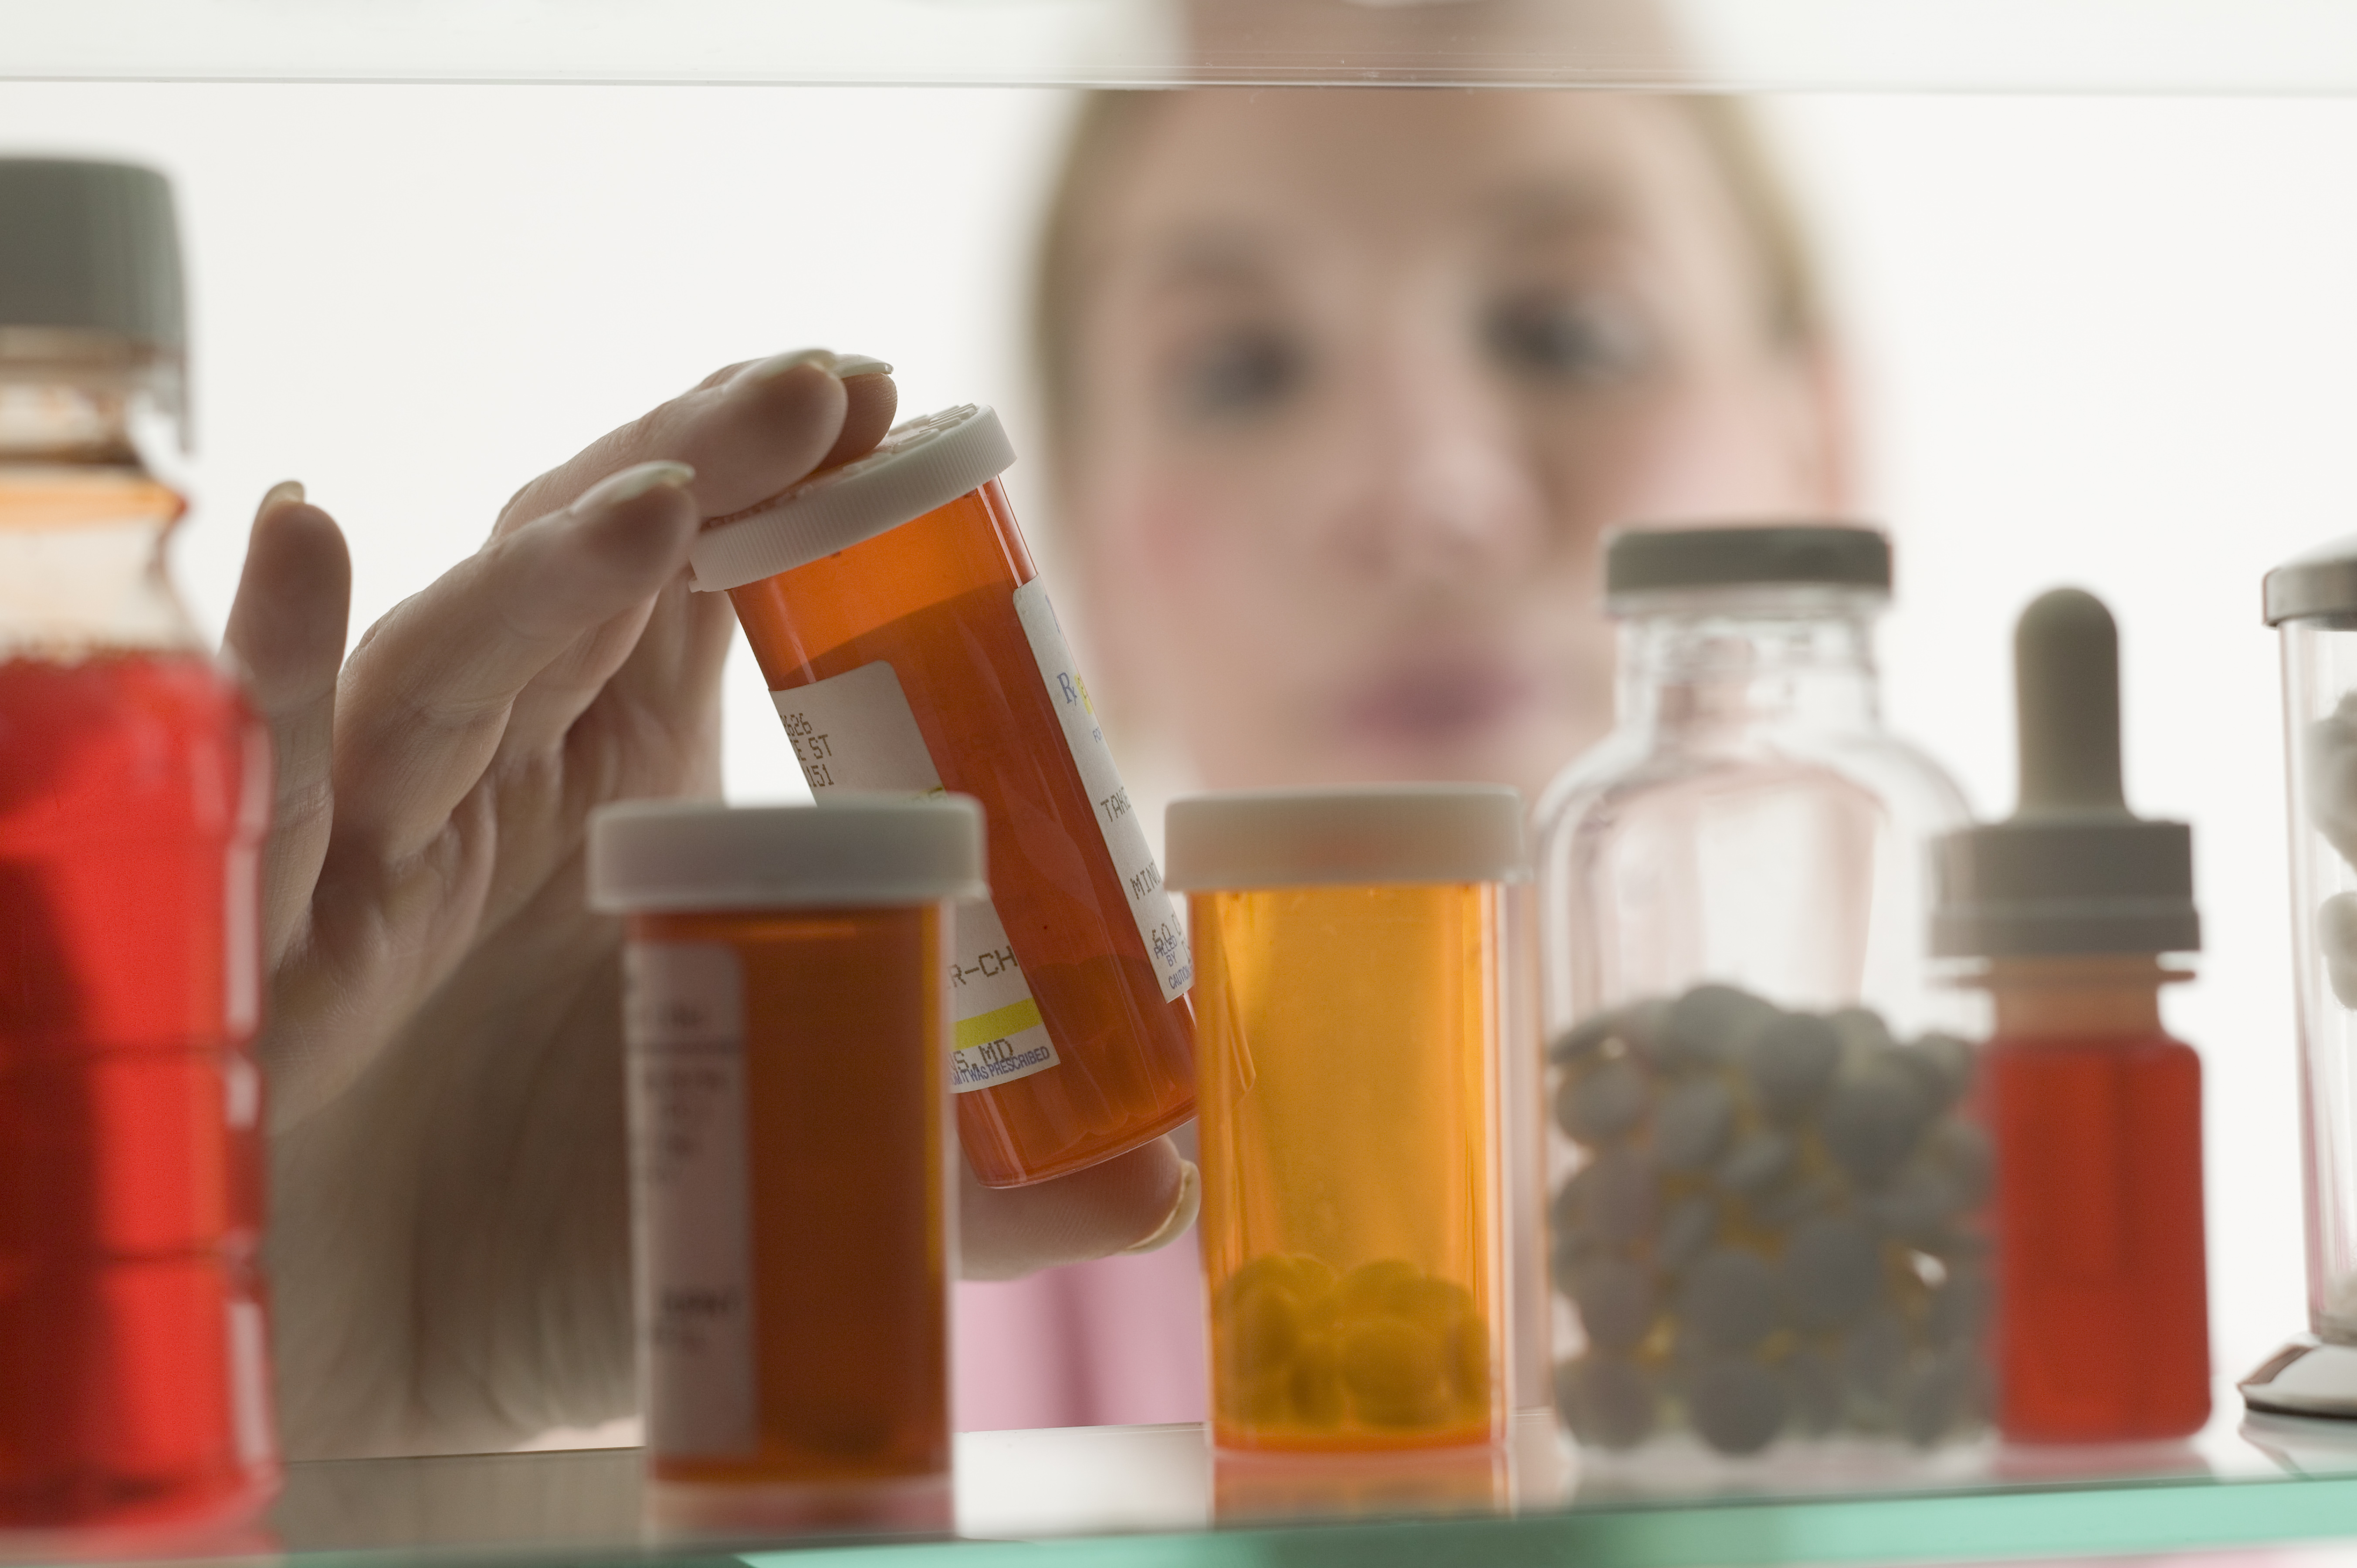 Pharmacist looking over collection of medicine bottles